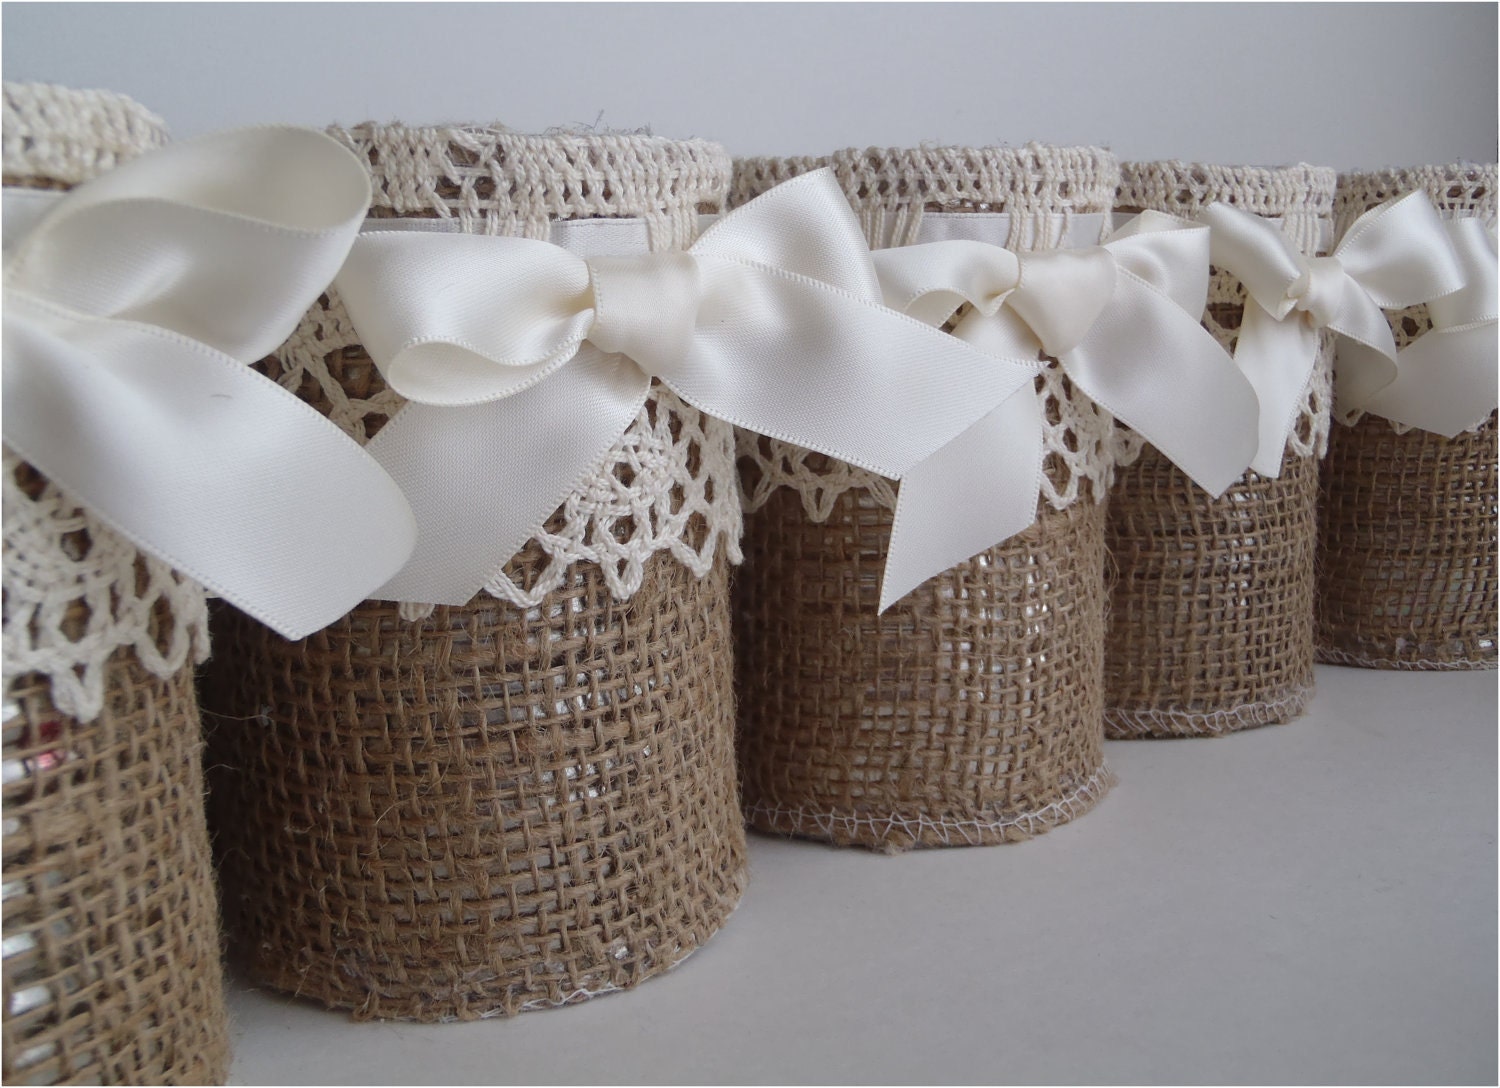 Burlap rustic vases, 14 containers, table decor for wedding upcycled tin cans, cute and woodland